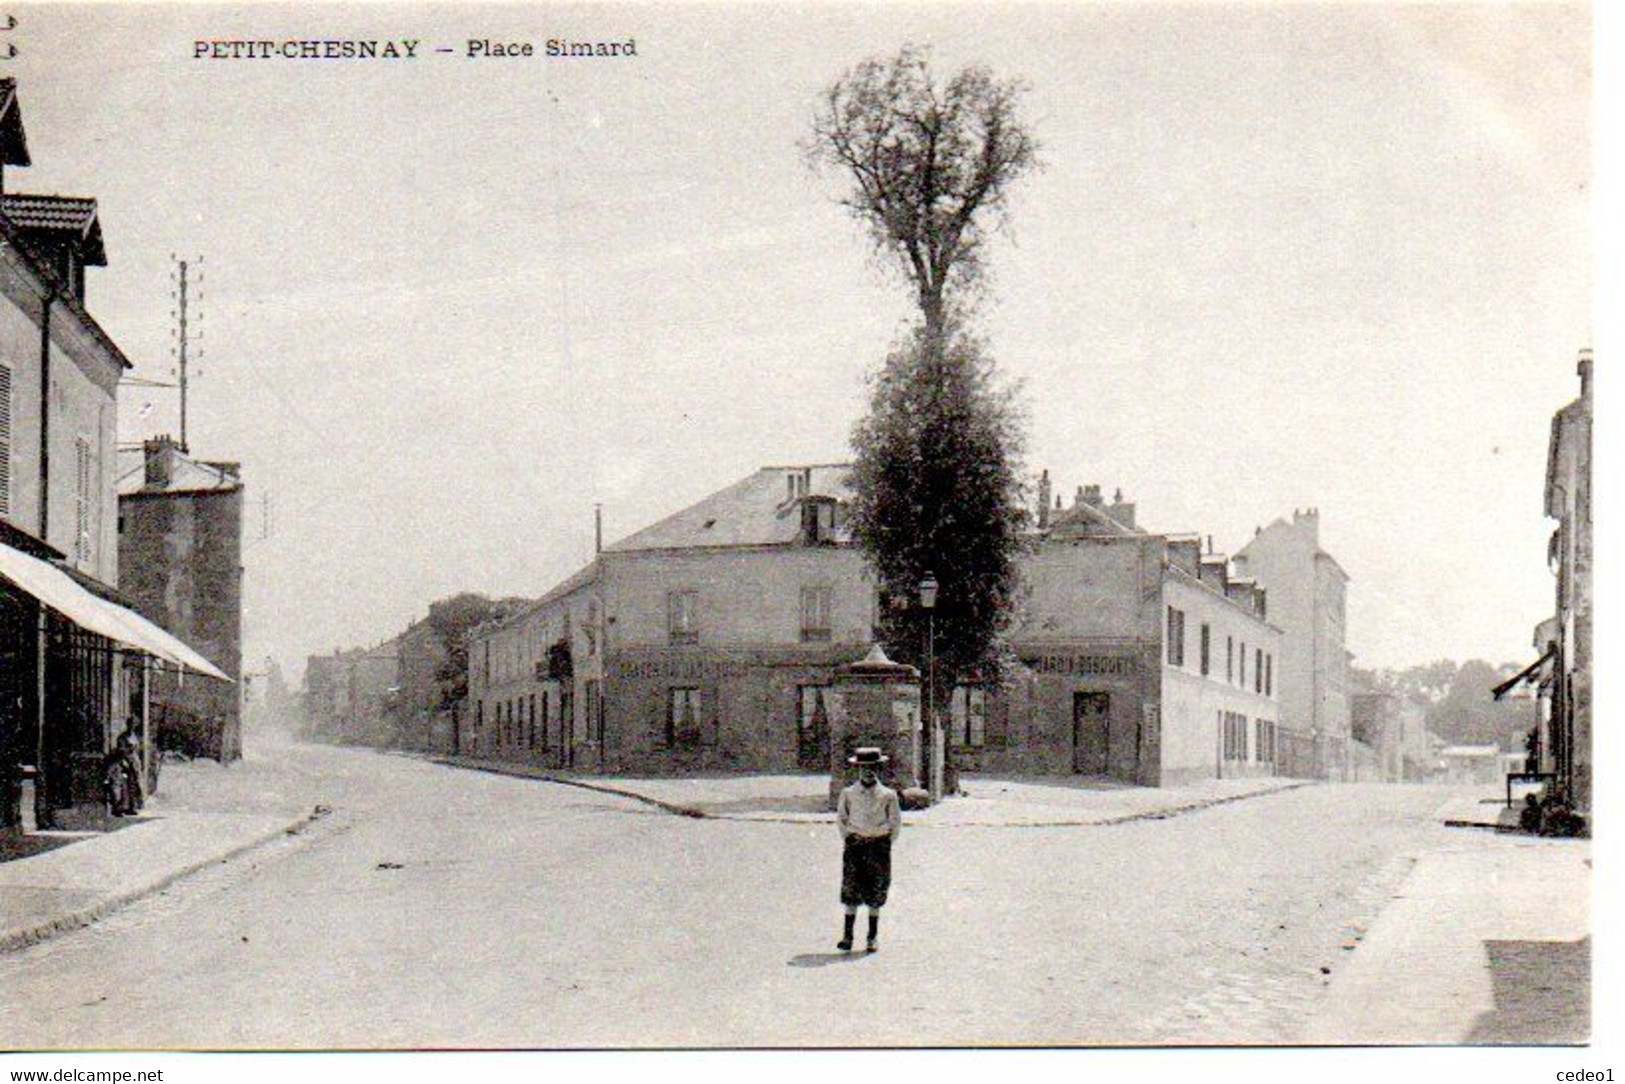 PETIT-CHESNAY  PLACE SIMARD - Le Chesnay